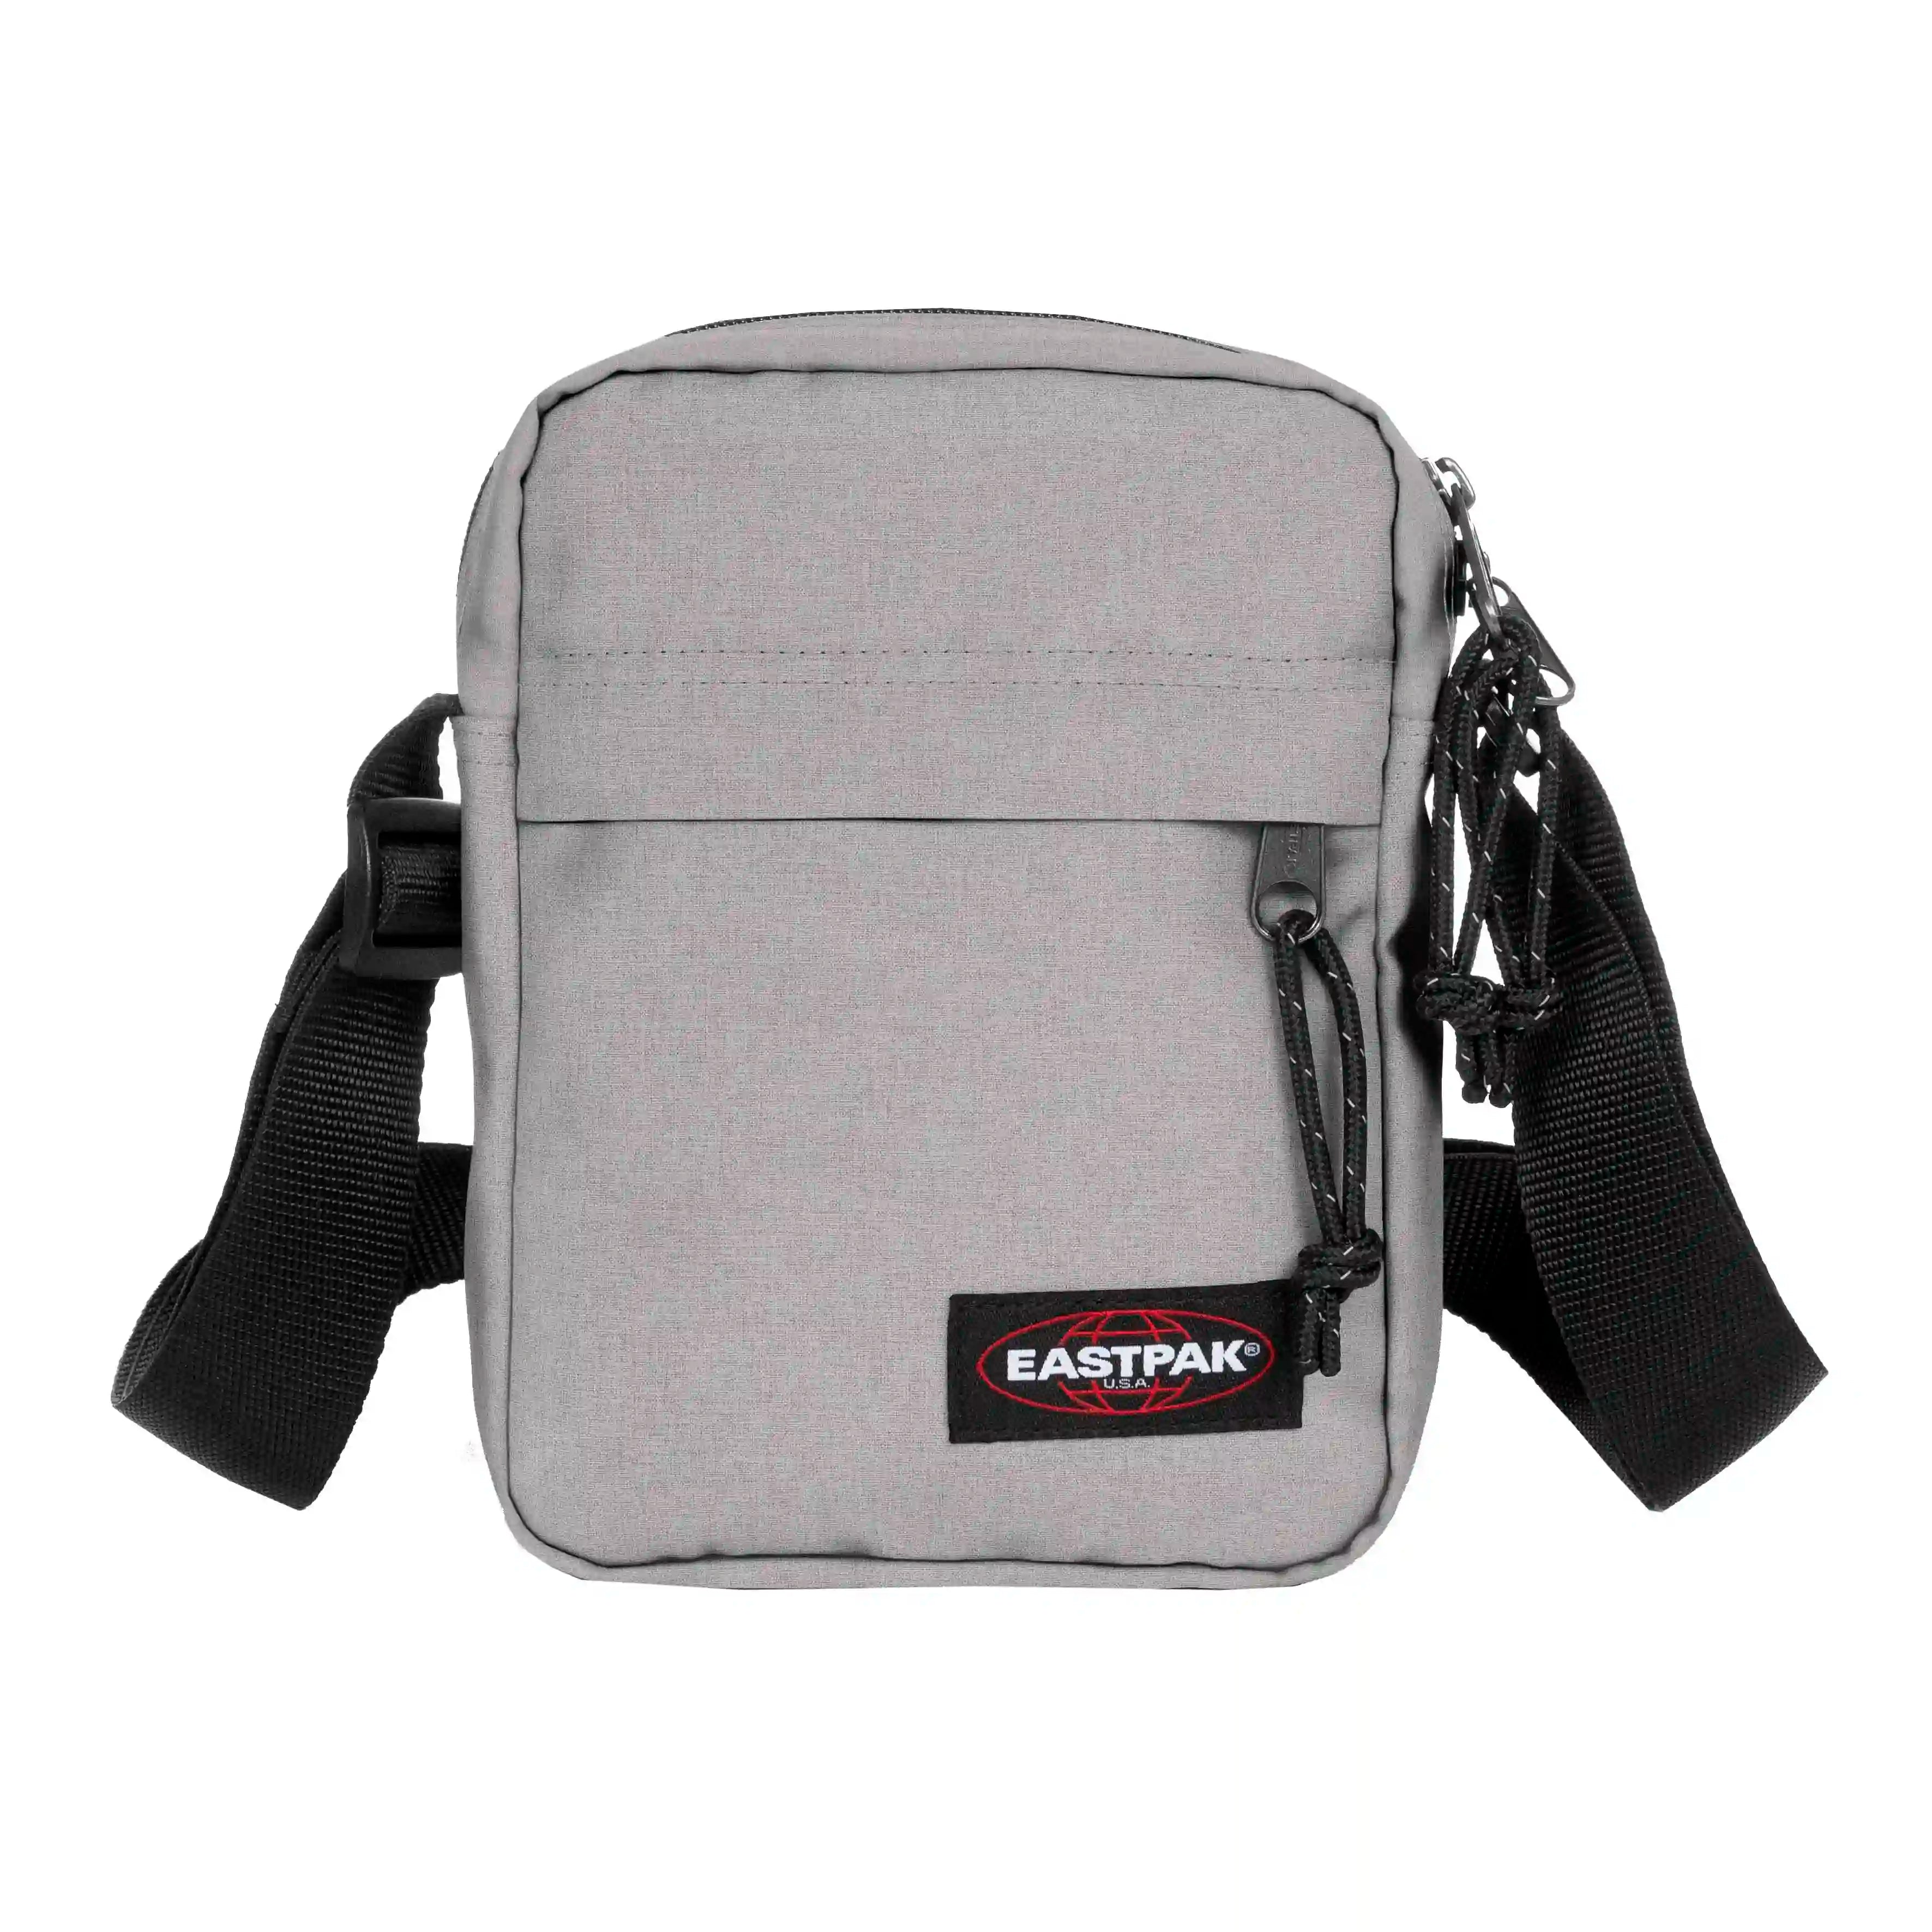 Eastpak Authentic The One Jugendtasche 21 cm - Snow Grey